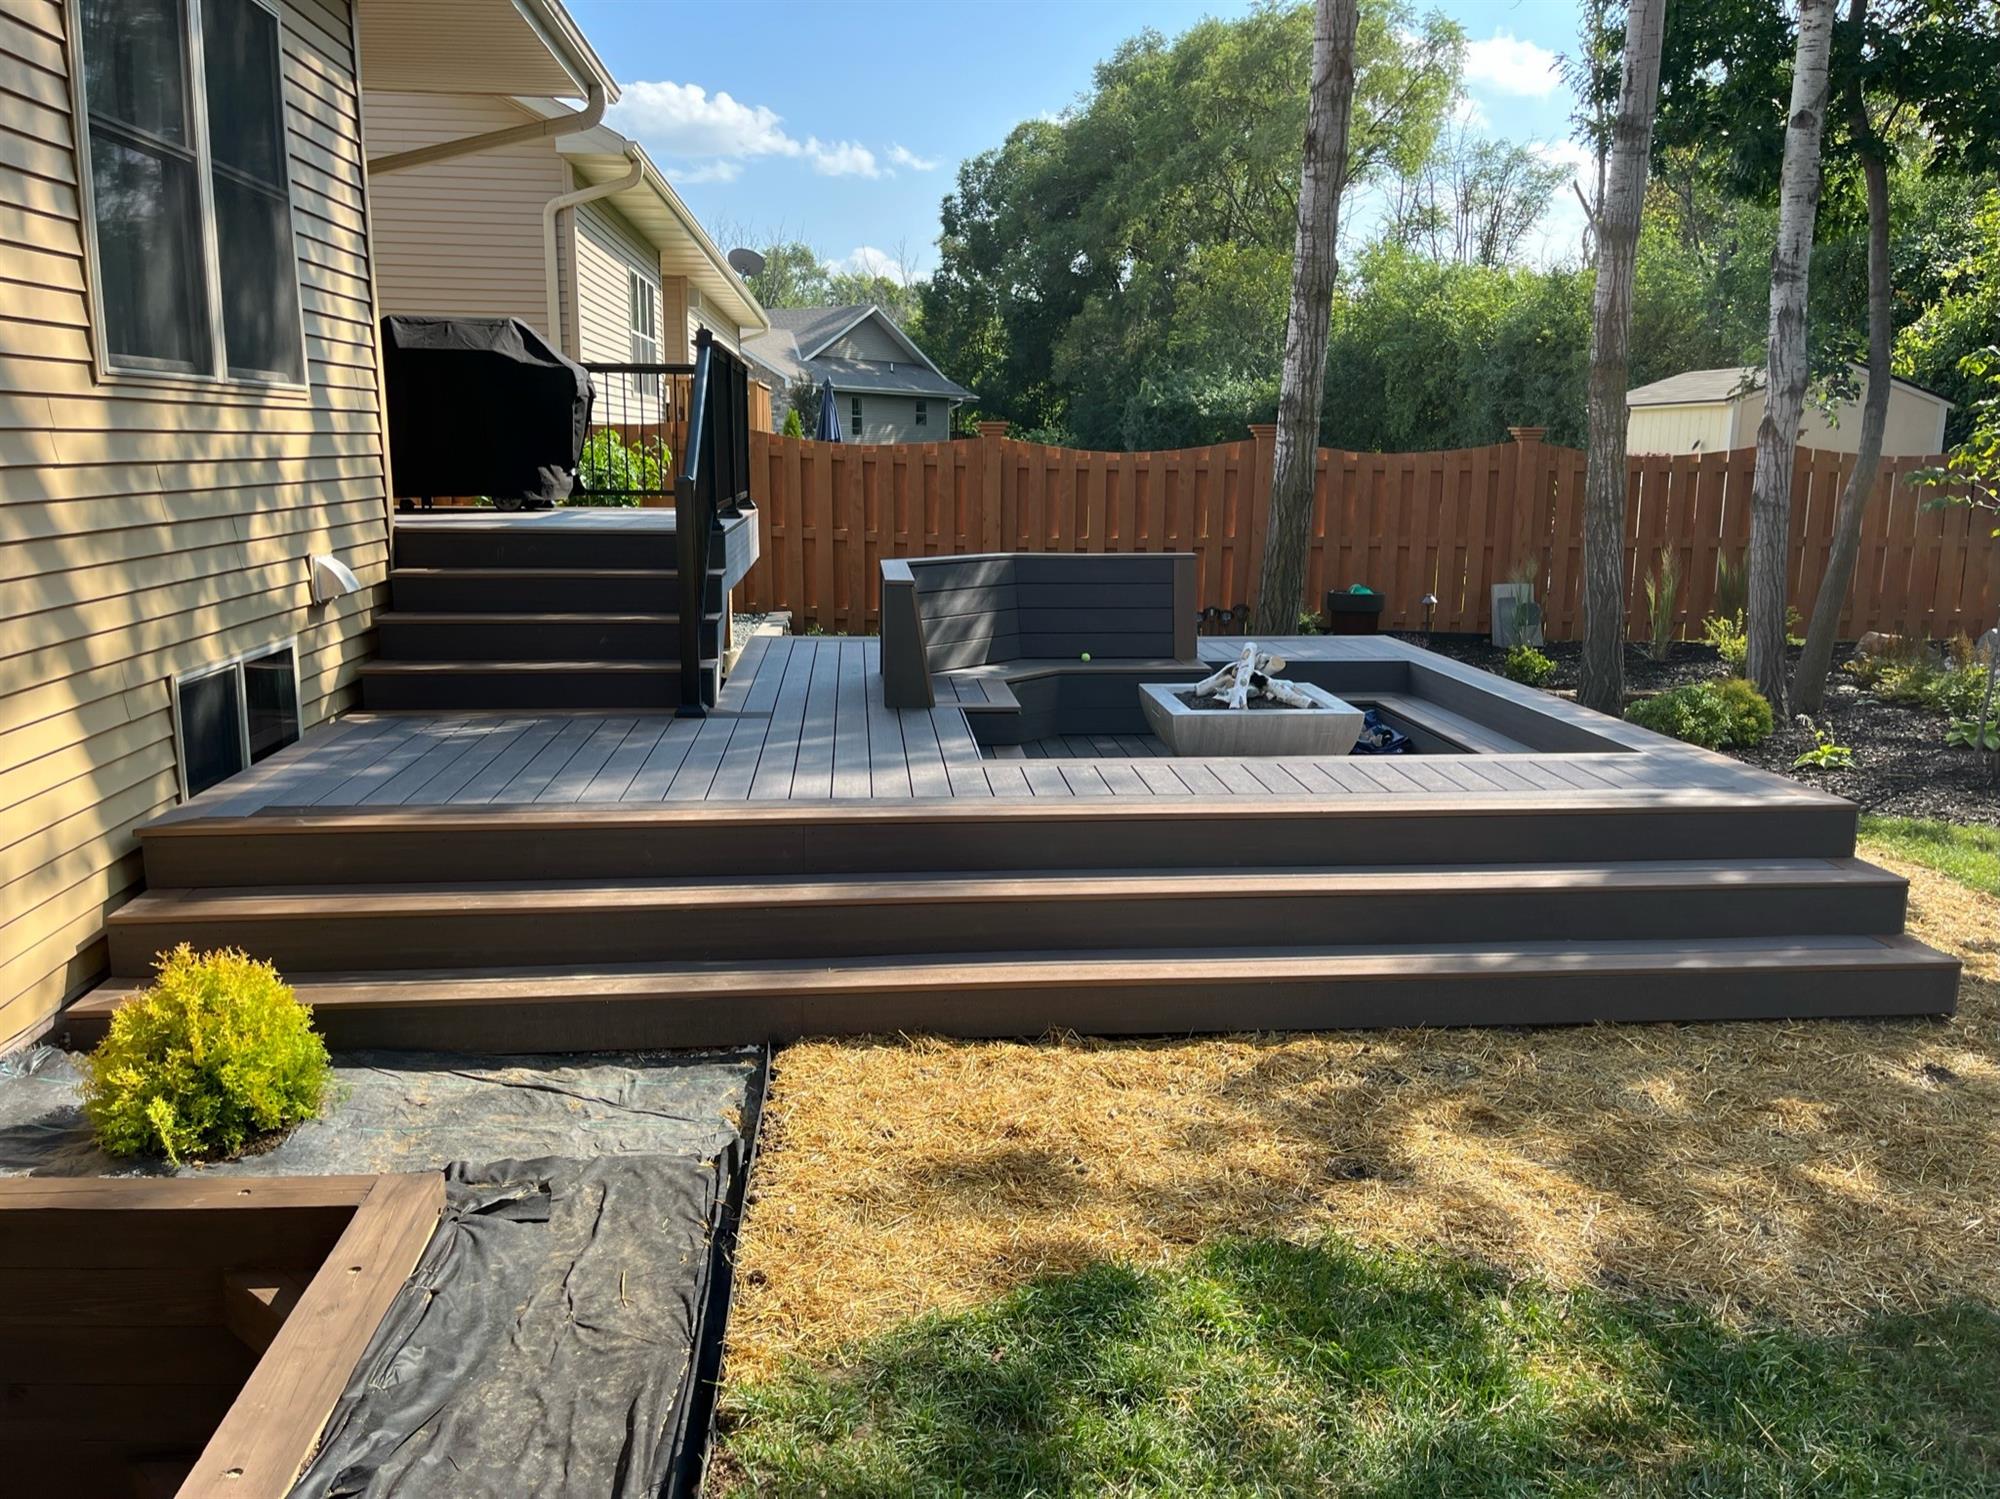 Low-Level Wood Deck with Dark Gray and Brown Tones, Small Recessed Fire Pit, Stairs from Yard, and Seating Area for Guests